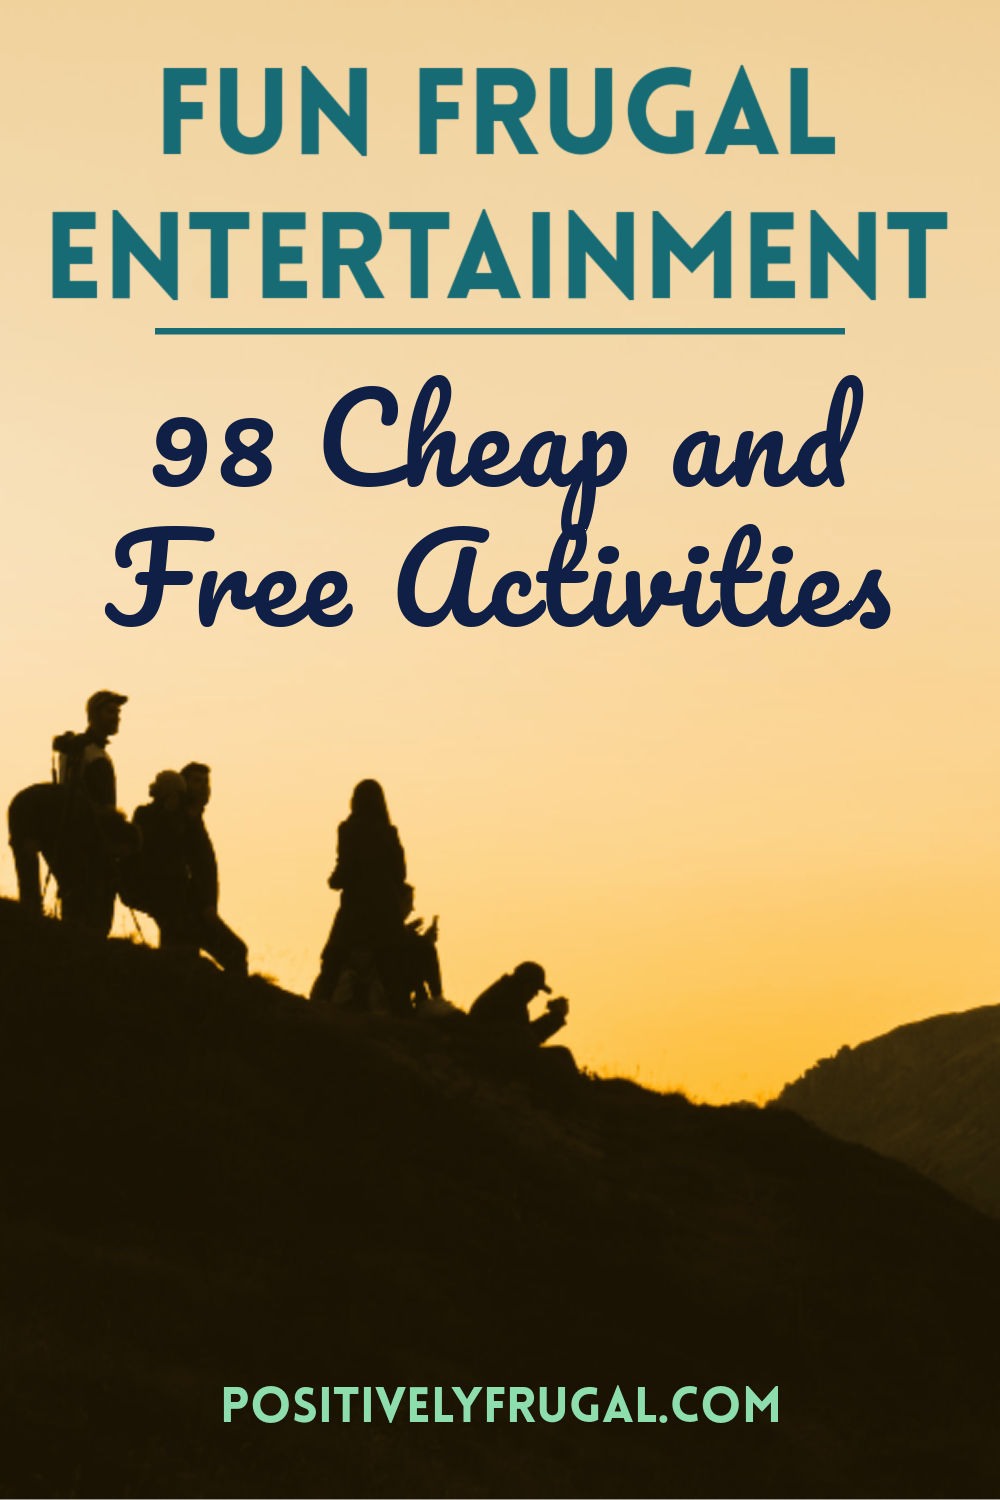 Fun Frugal Entertainment Cheap and Free Activities by PositivelyFrugal.com